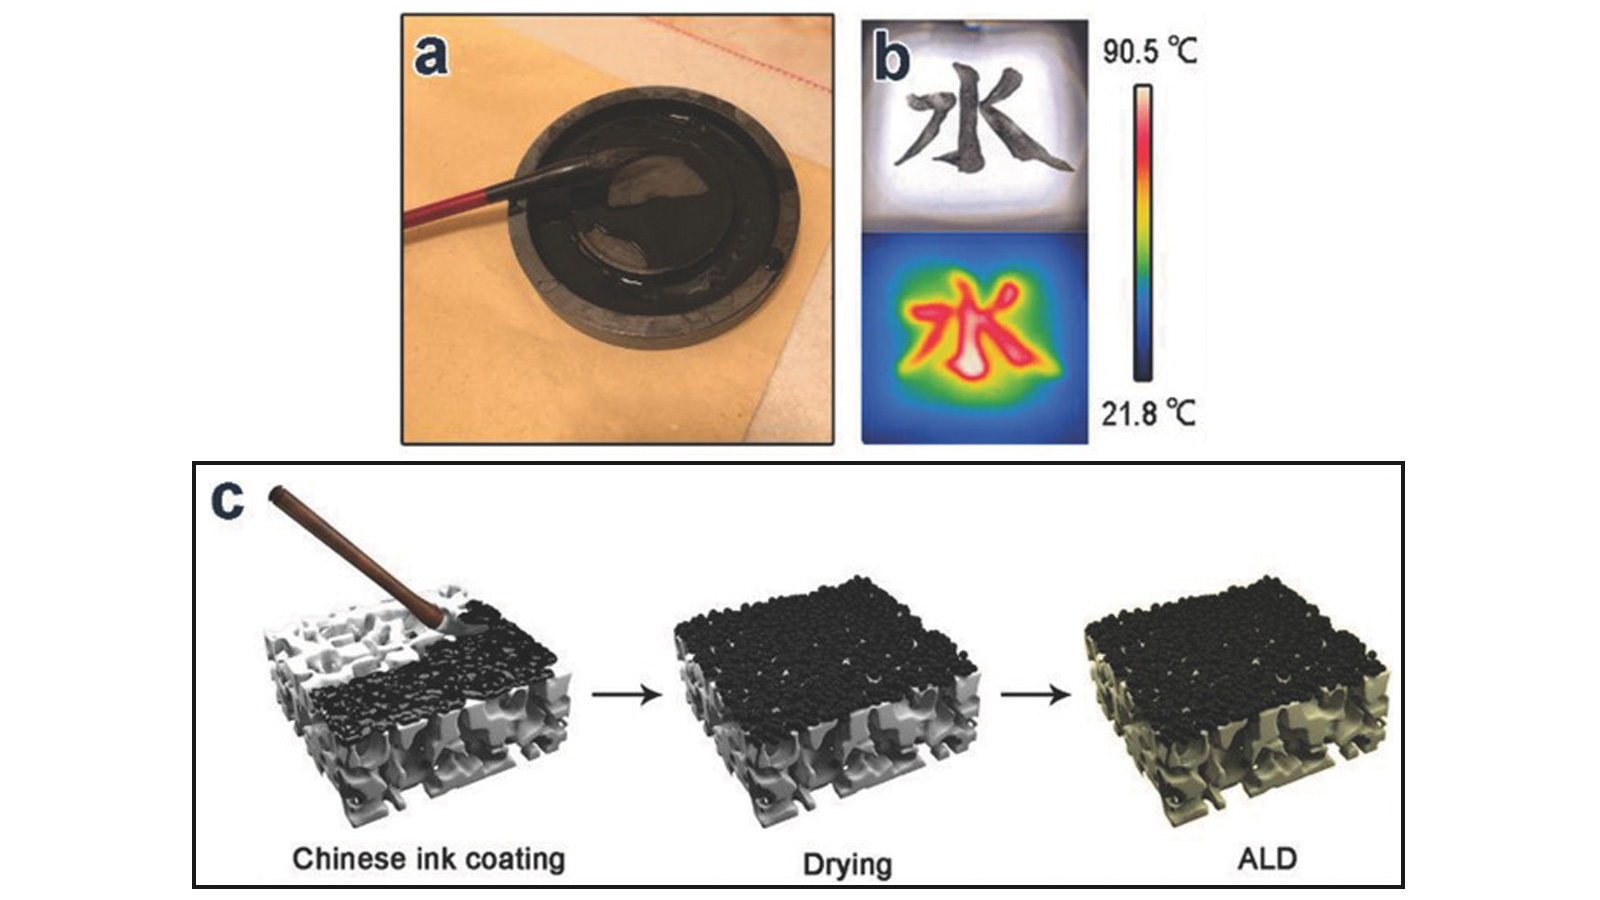 This shows a) Chinese ink and writing brush, similar to those used for writing and drawing for over 2000 years, b) digital and infrared images of the Chinese character “water” written in Chinese ink under simulated sunlight and c) a scheme of the fabrication process for ALD/Chinese‐ink‐coated materials. (Image by Argonne National Laboratory.)